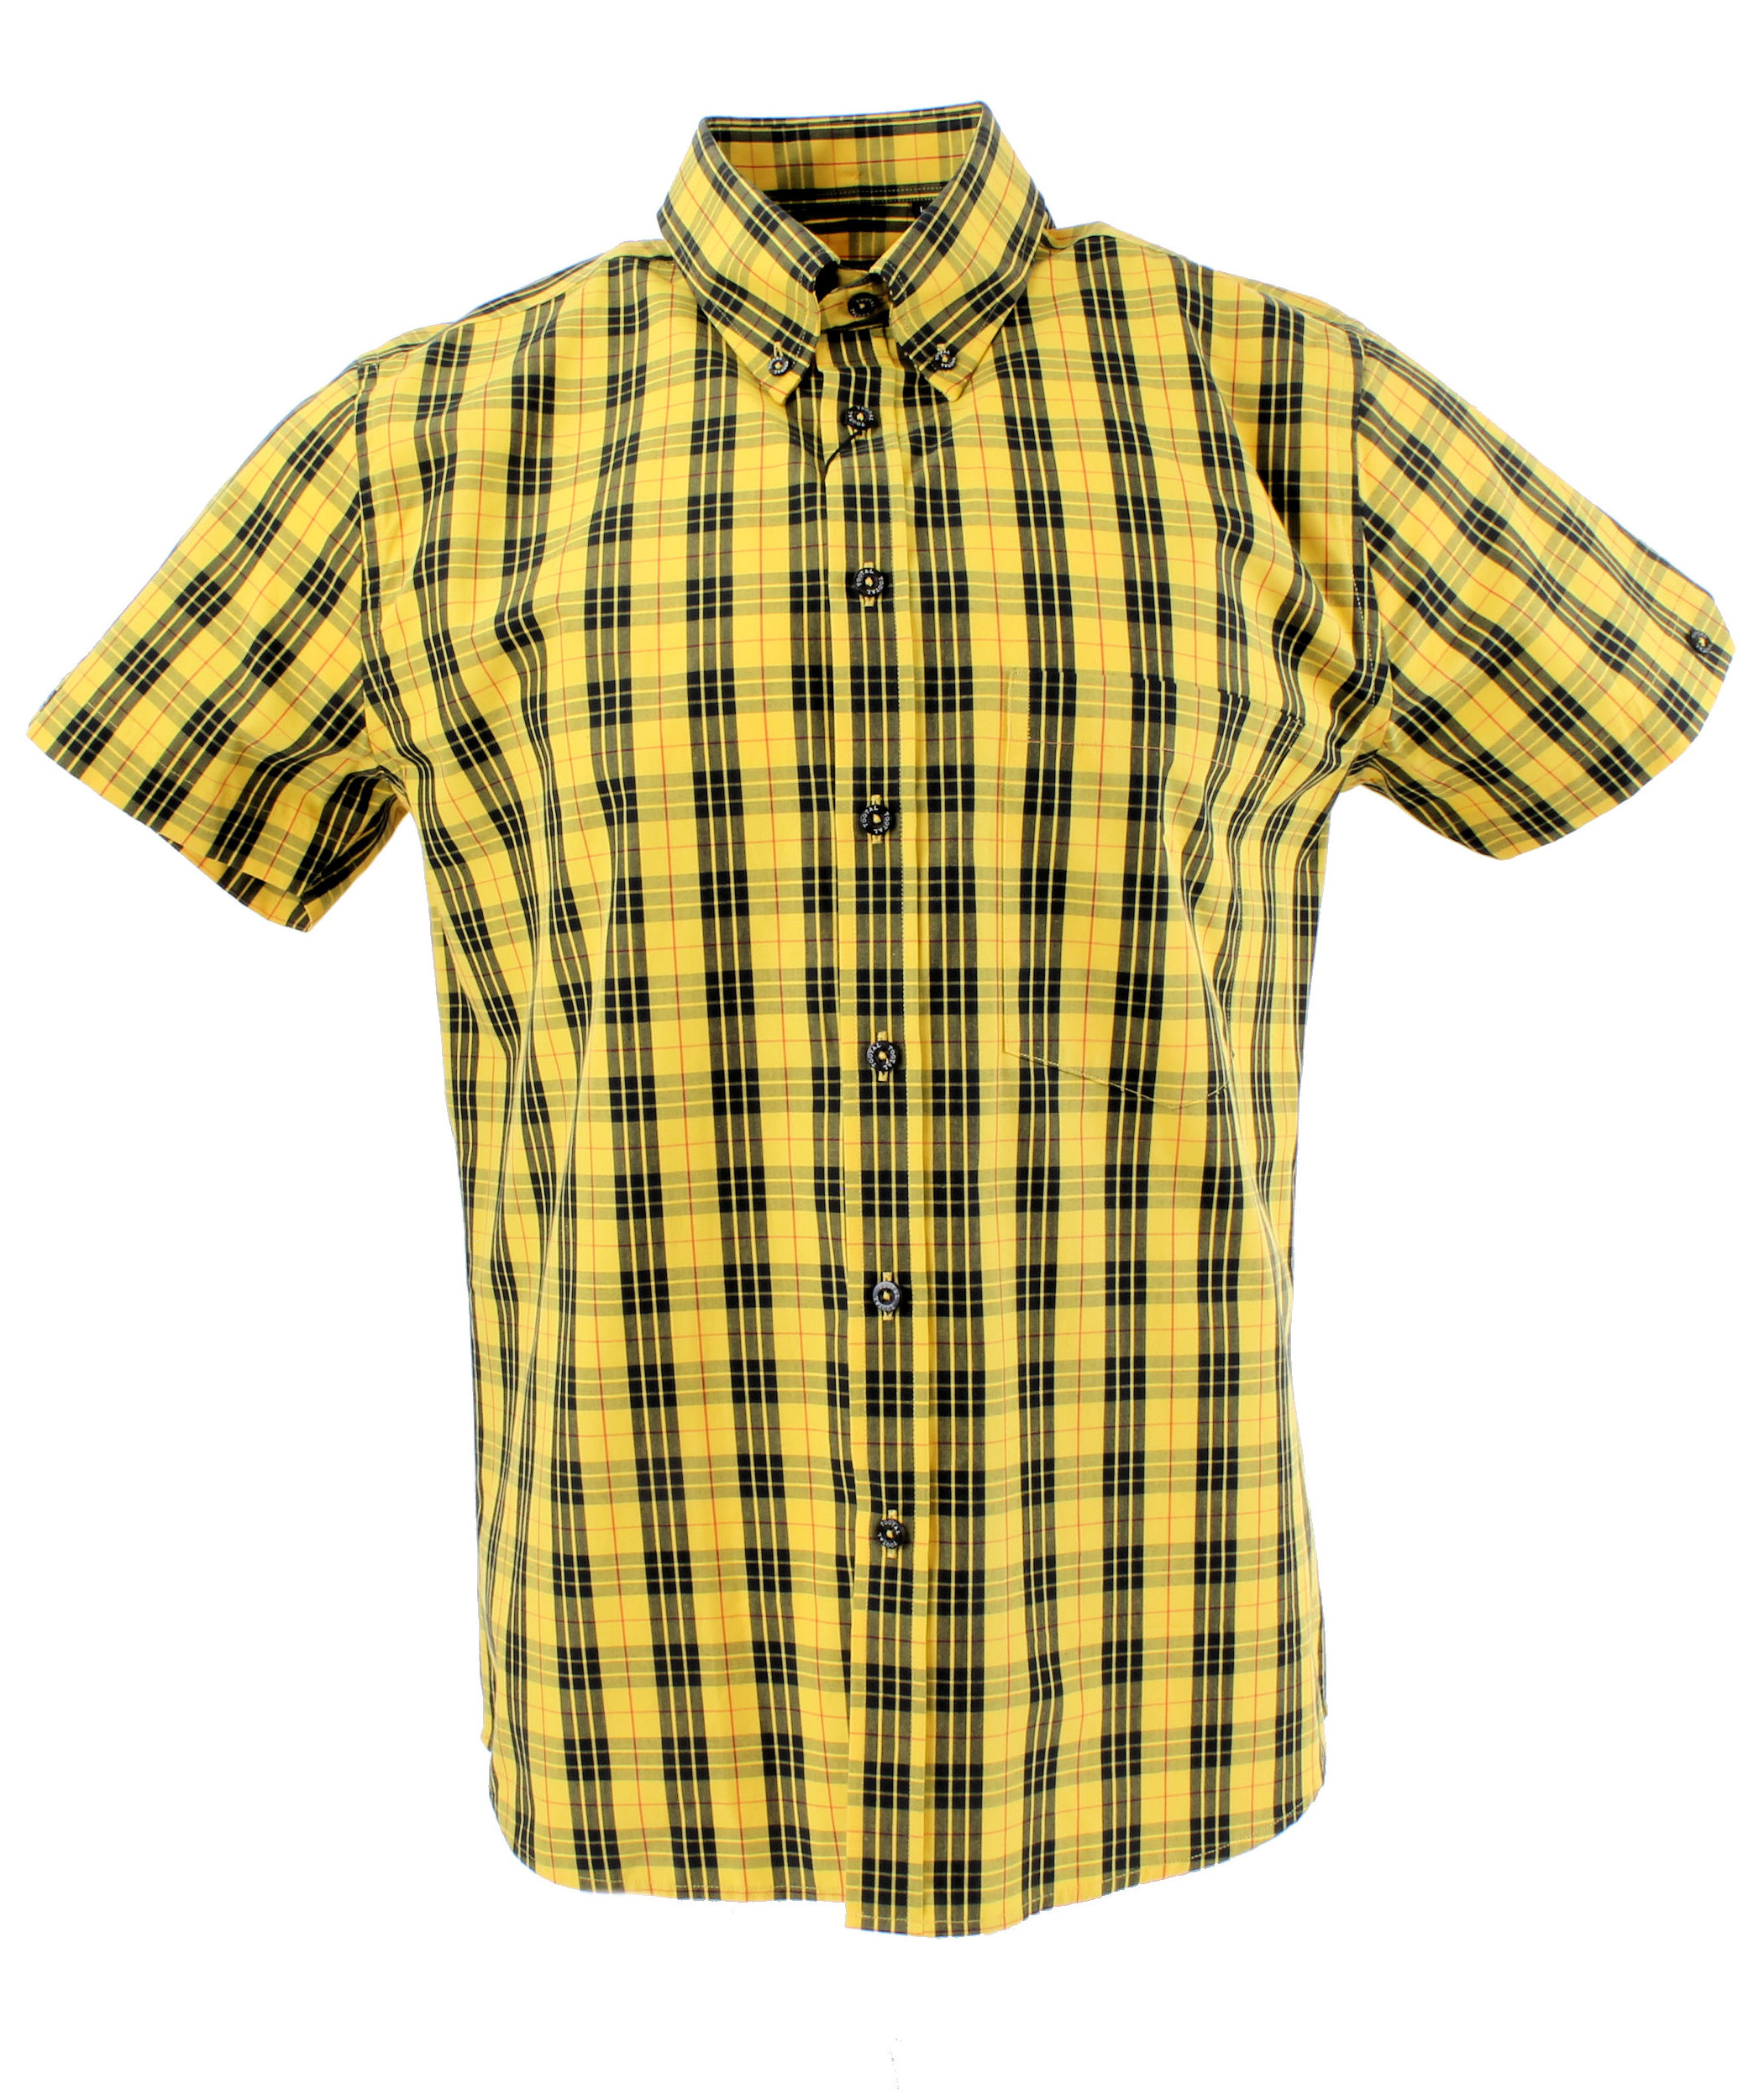 Tootal Slim Fit Gold & Black Check Cotton Shirt | Tootal